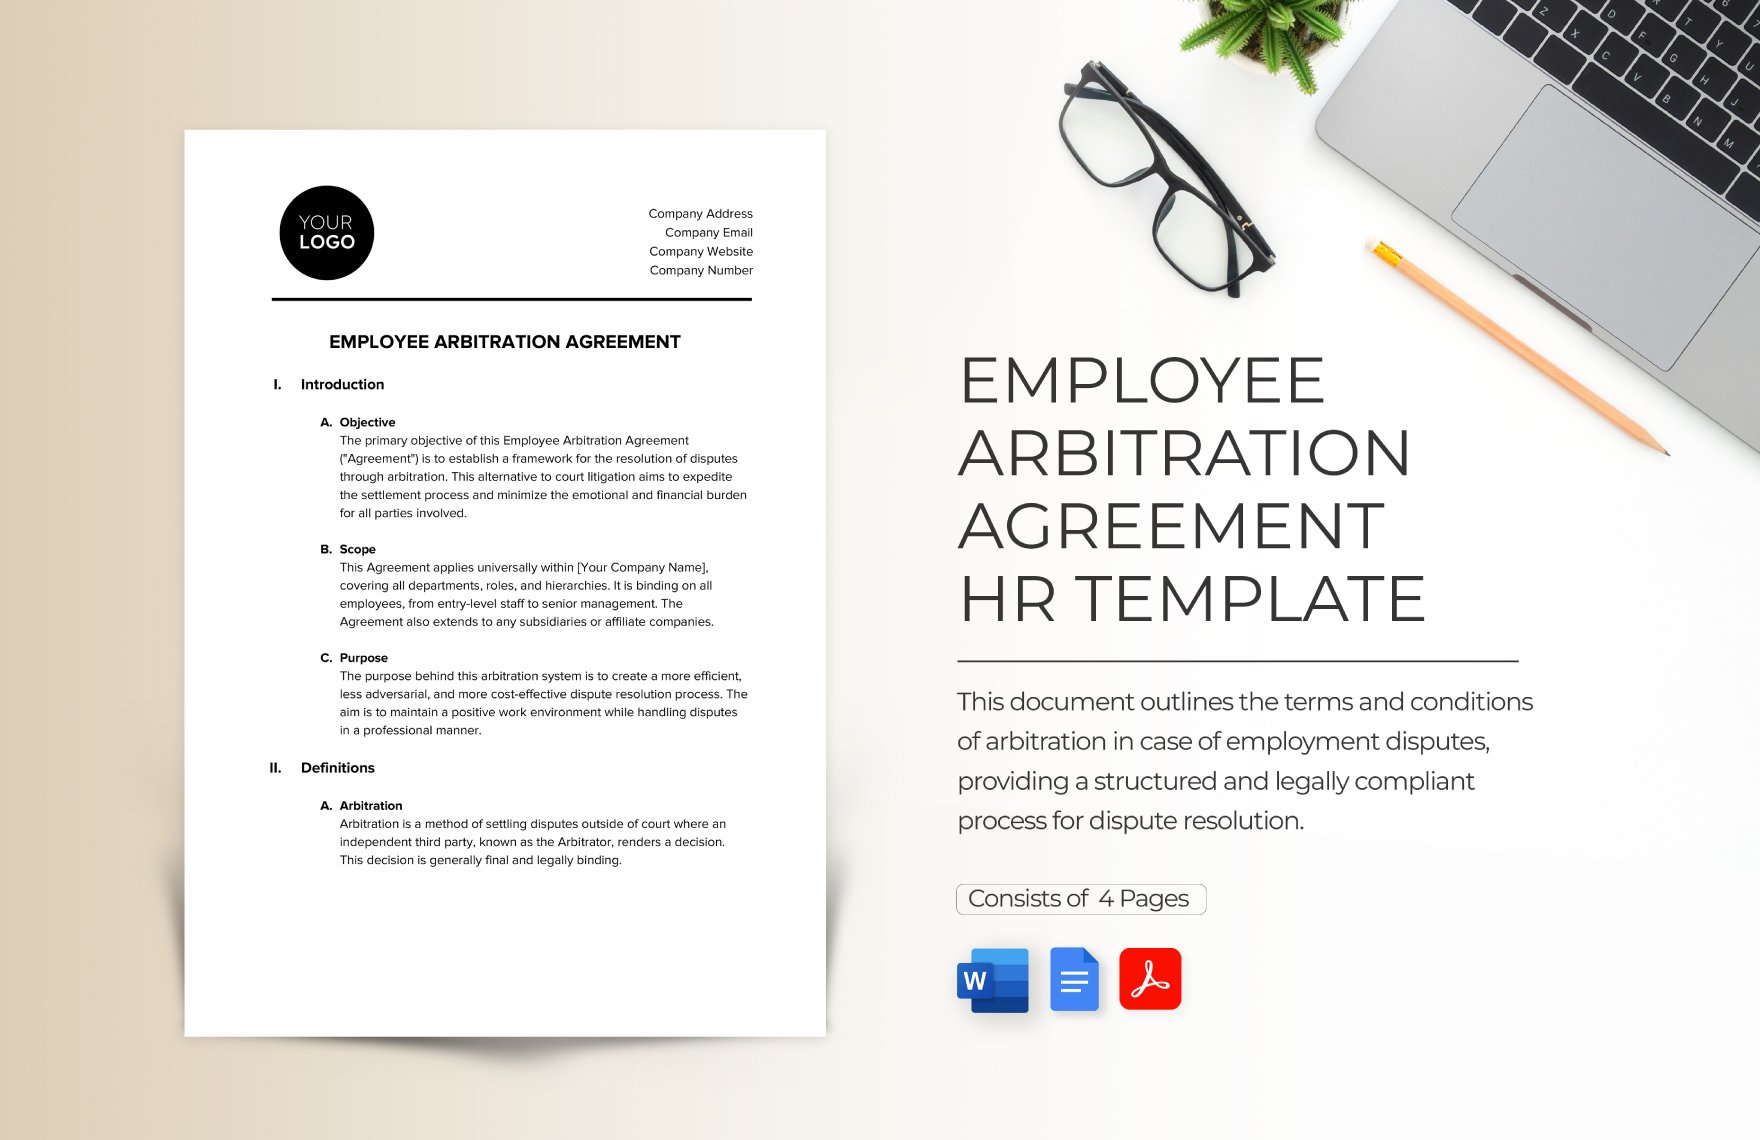 Employee Arbitration Agreement HR Template in Word, Google Docs, PDF